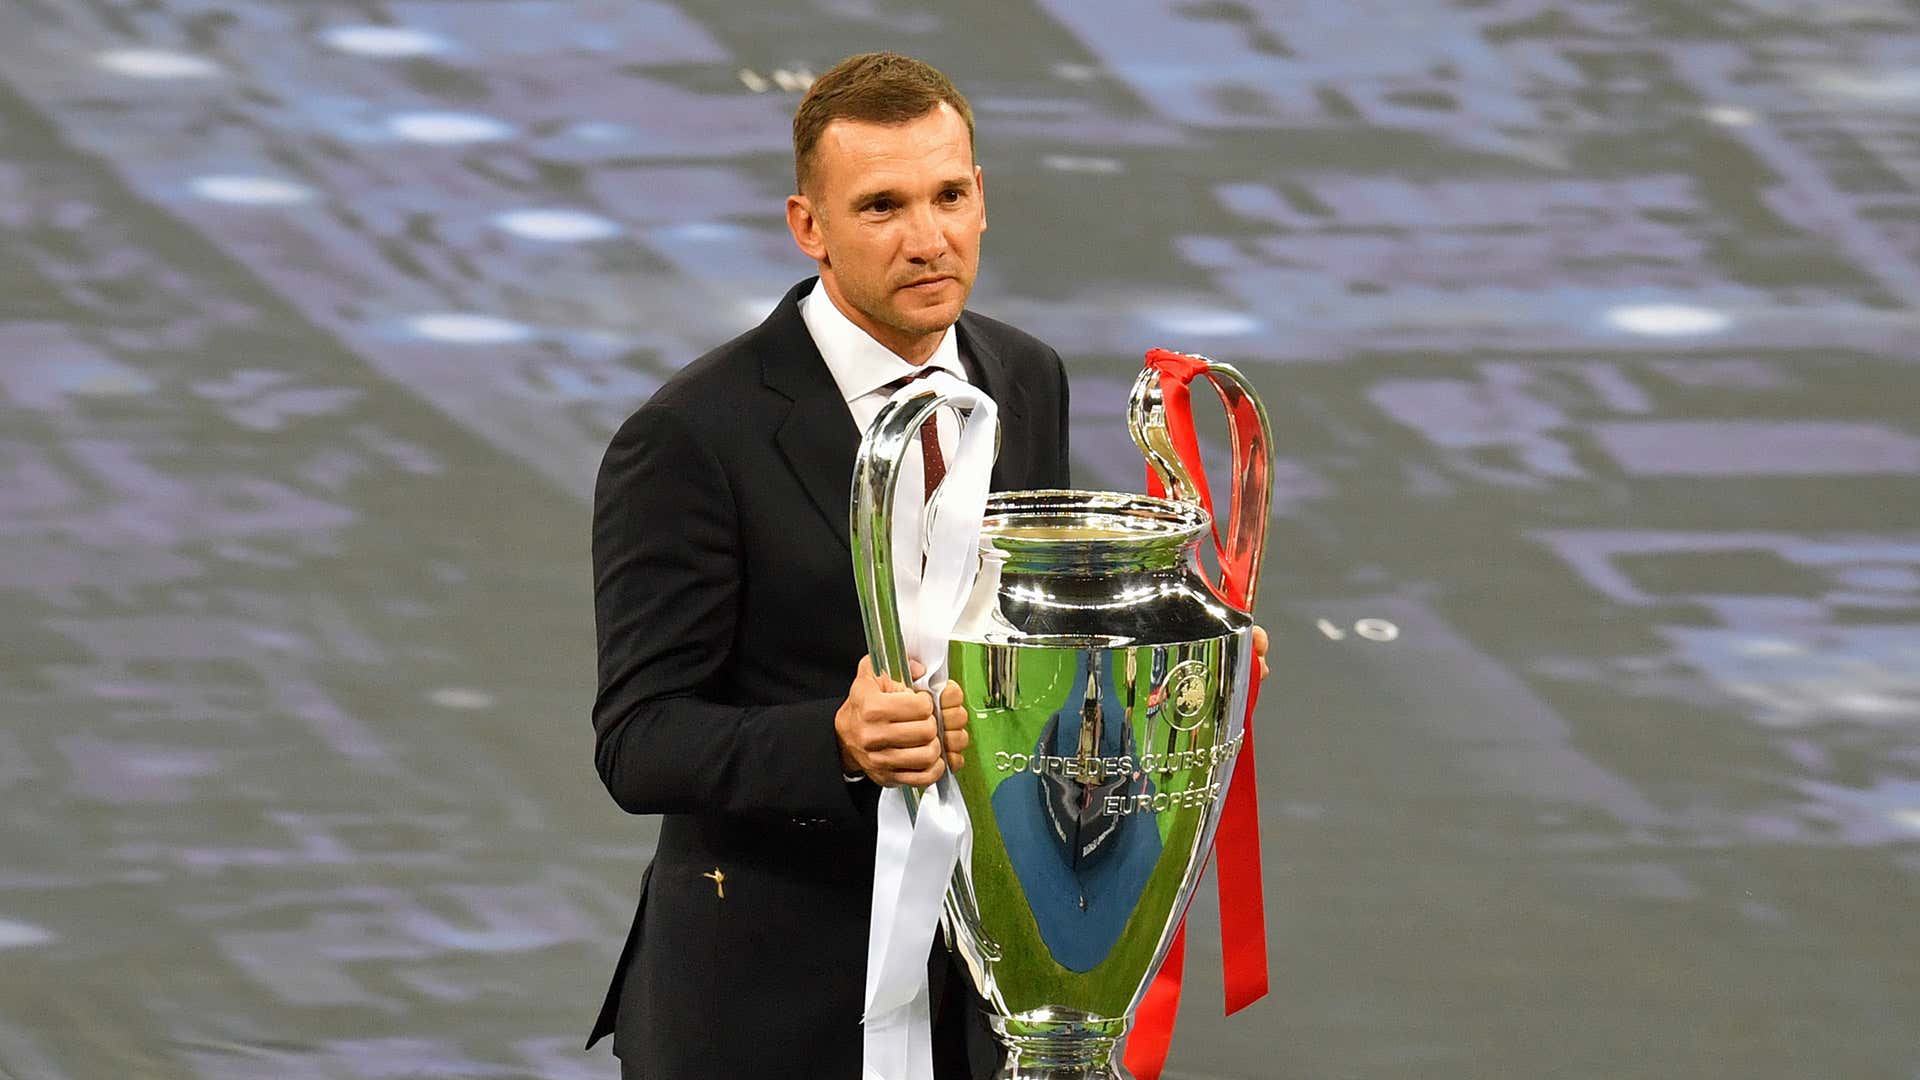 Prematch Andriy Shevchenko trophy Real Madrid Liverpool Champions League final 26052018